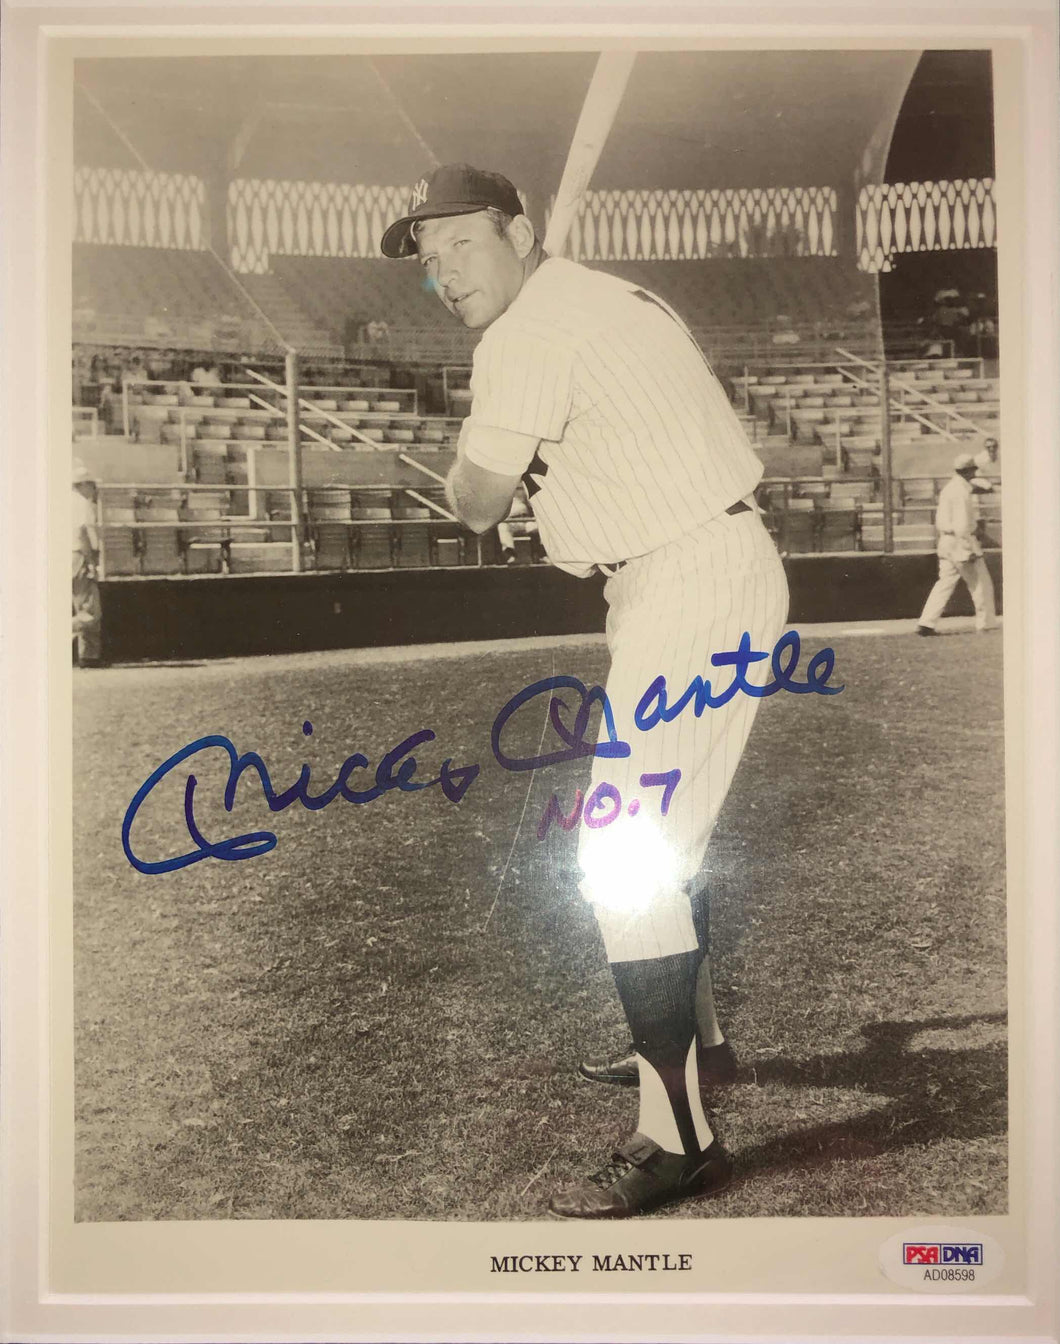 Mickey Mantle Signed 8x10 Photo Plaque PSA/DNA Authentication Services Certified